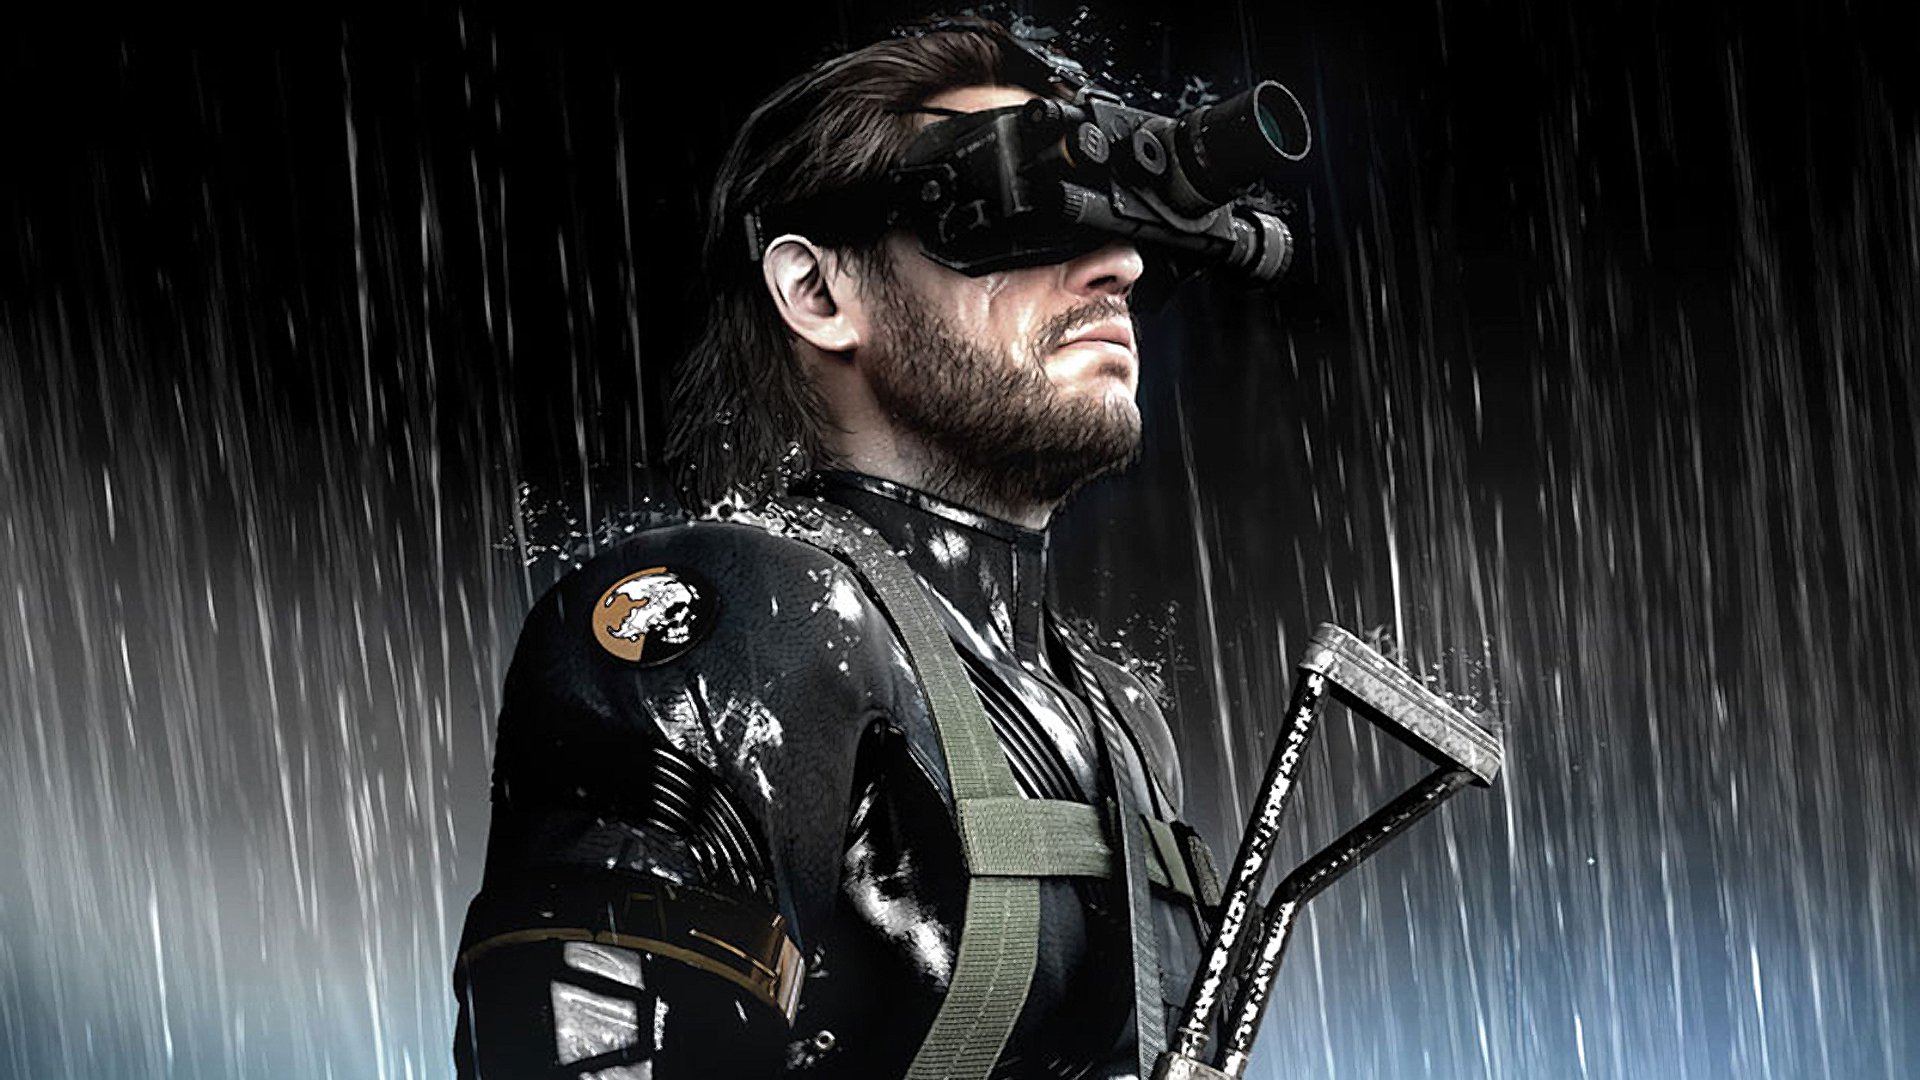 art of metal gear solid v review